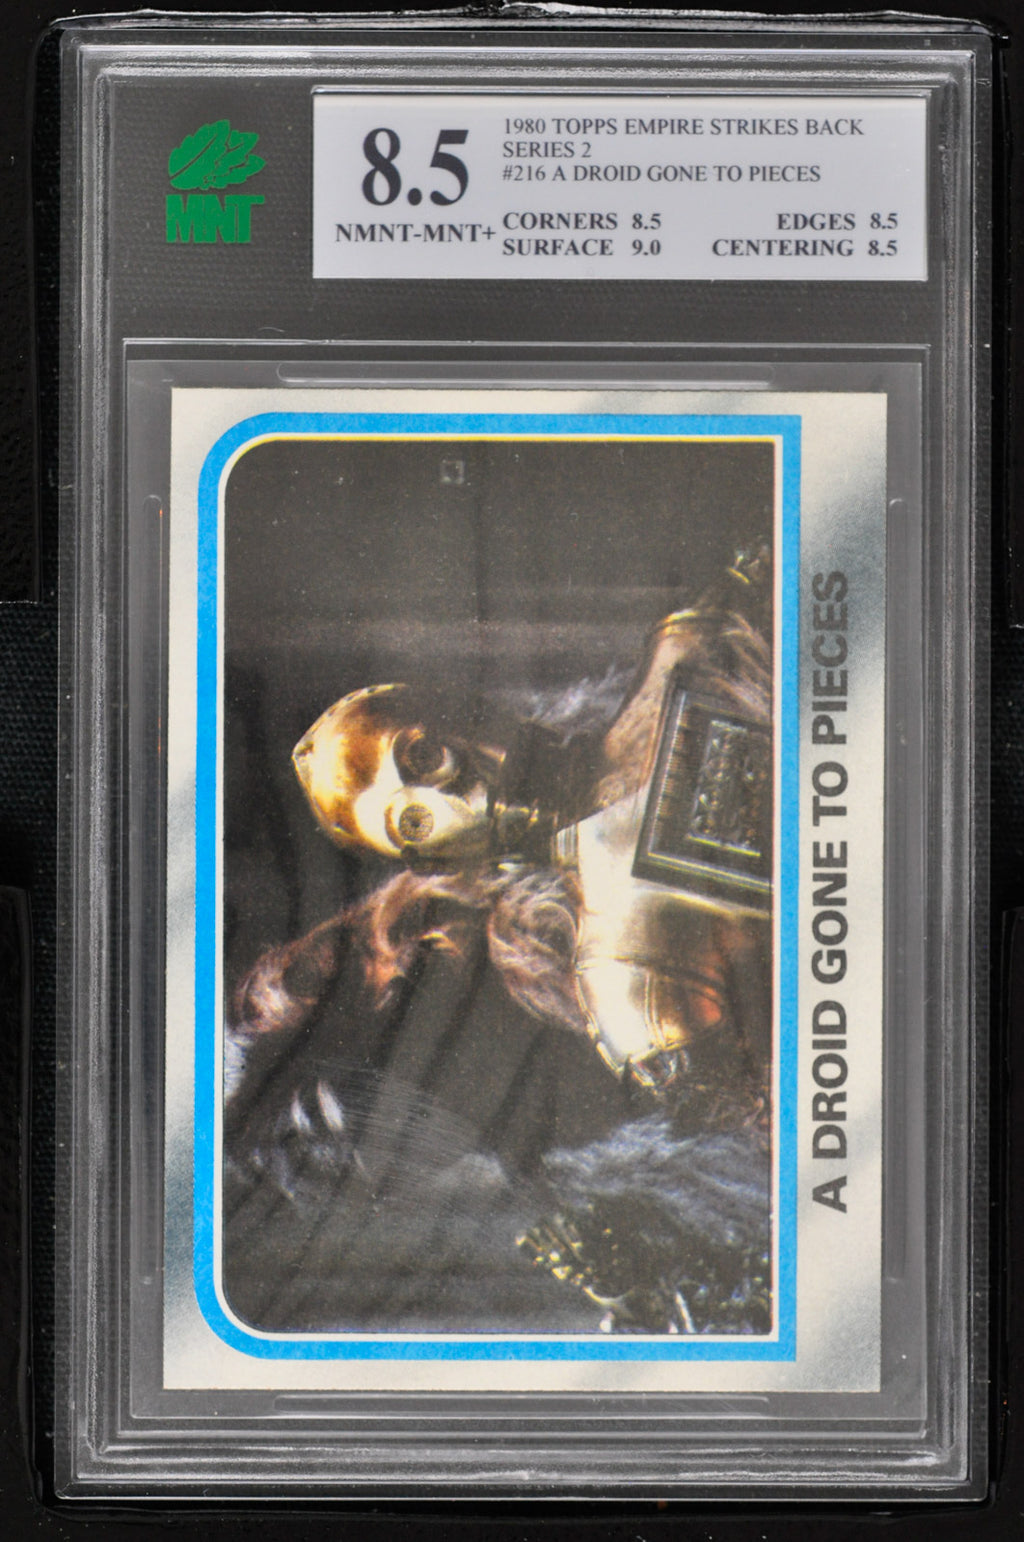 1980 Topps Star Wars ESB Series 2 #216 A Droid Gone to Pieces - MNT 8.5